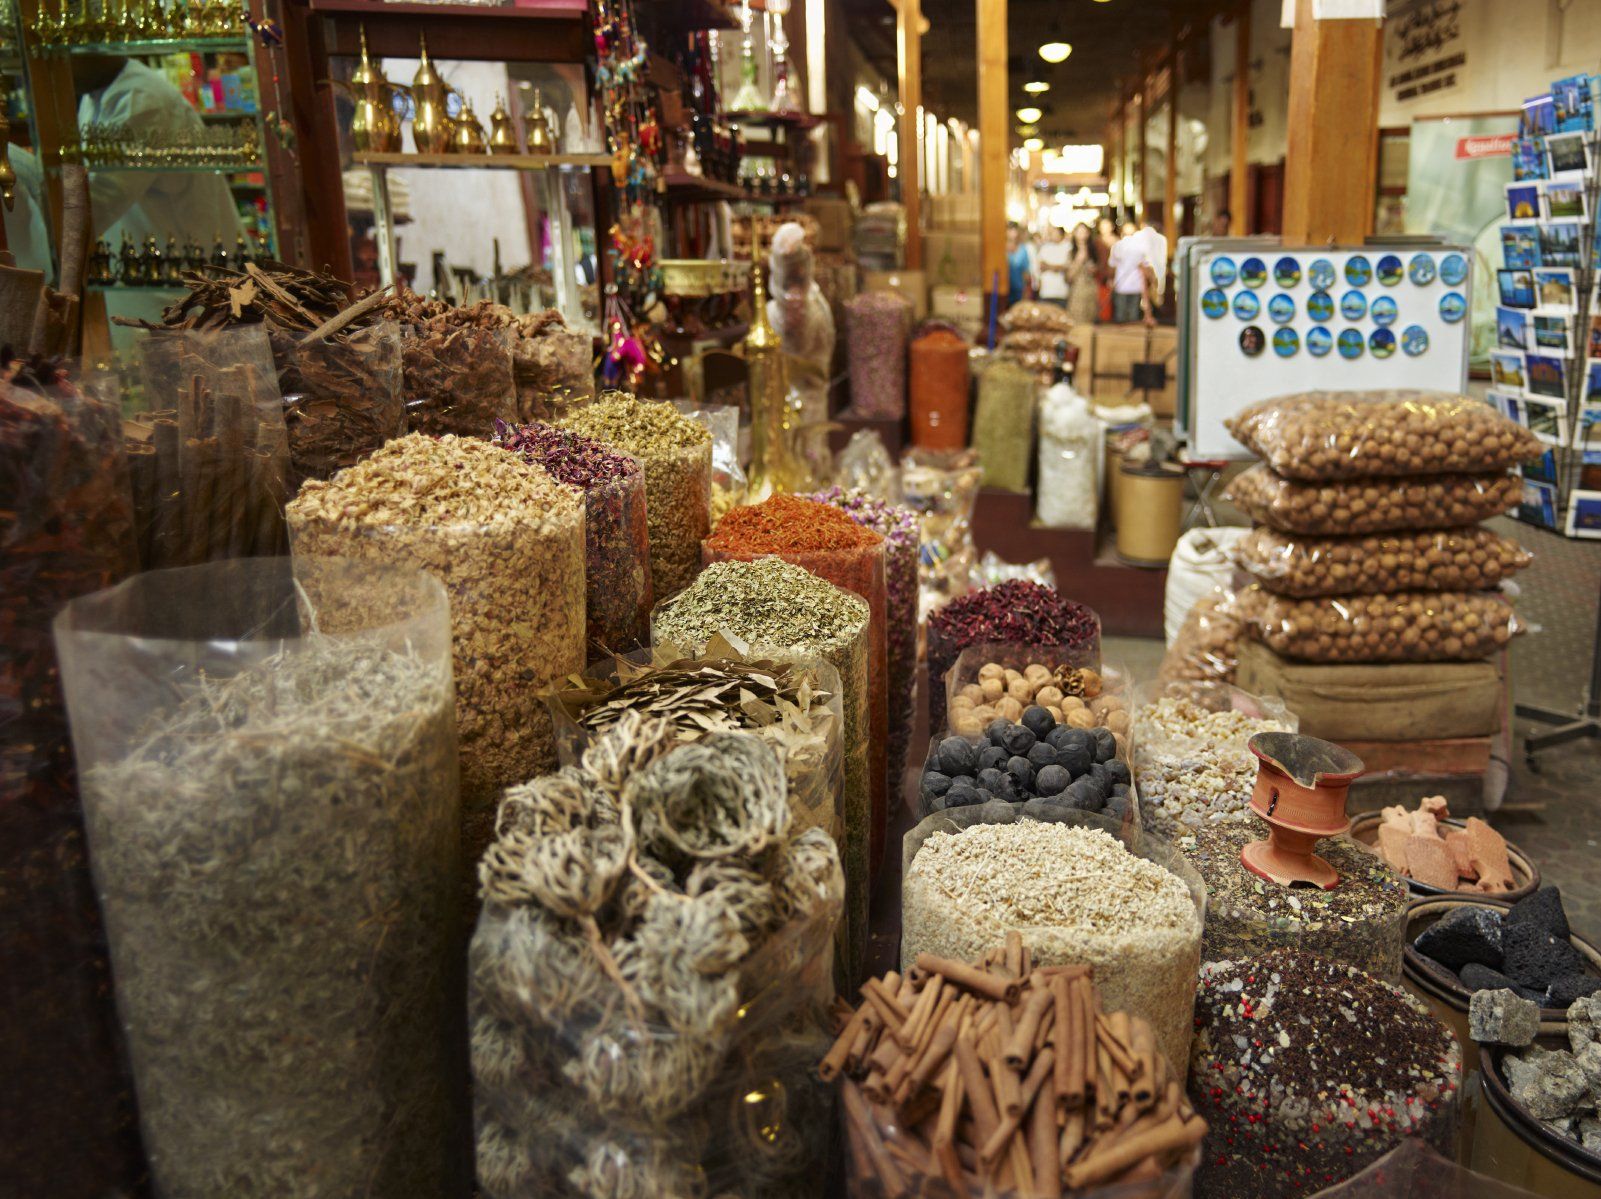  Various spices and goods highlighting developments in German-Italian law are on display at a covered market stall